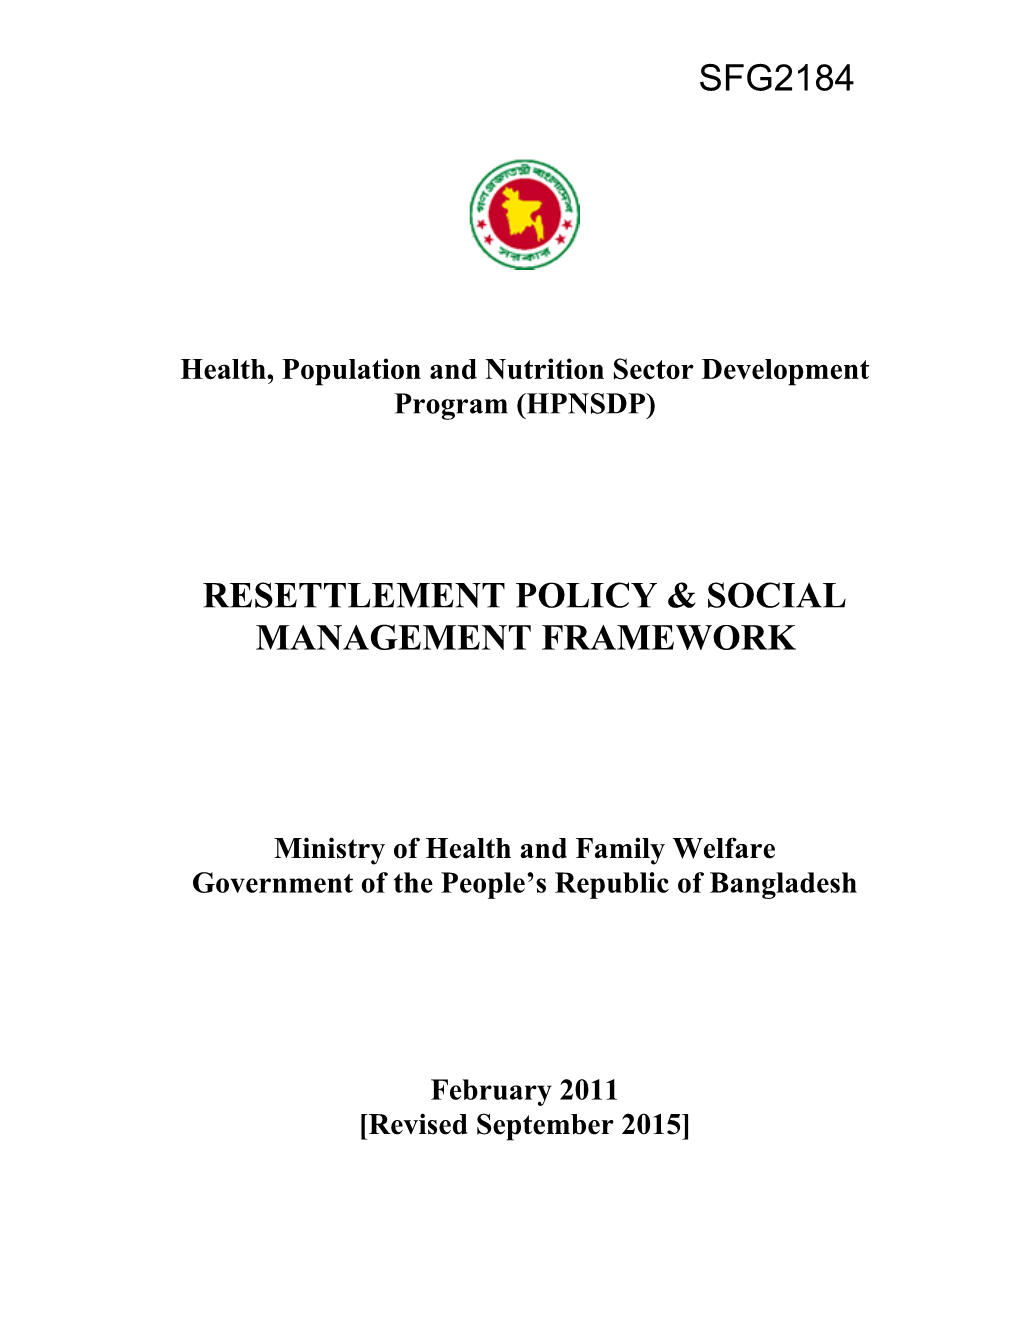 Health, Population and Nutrition Sector Development